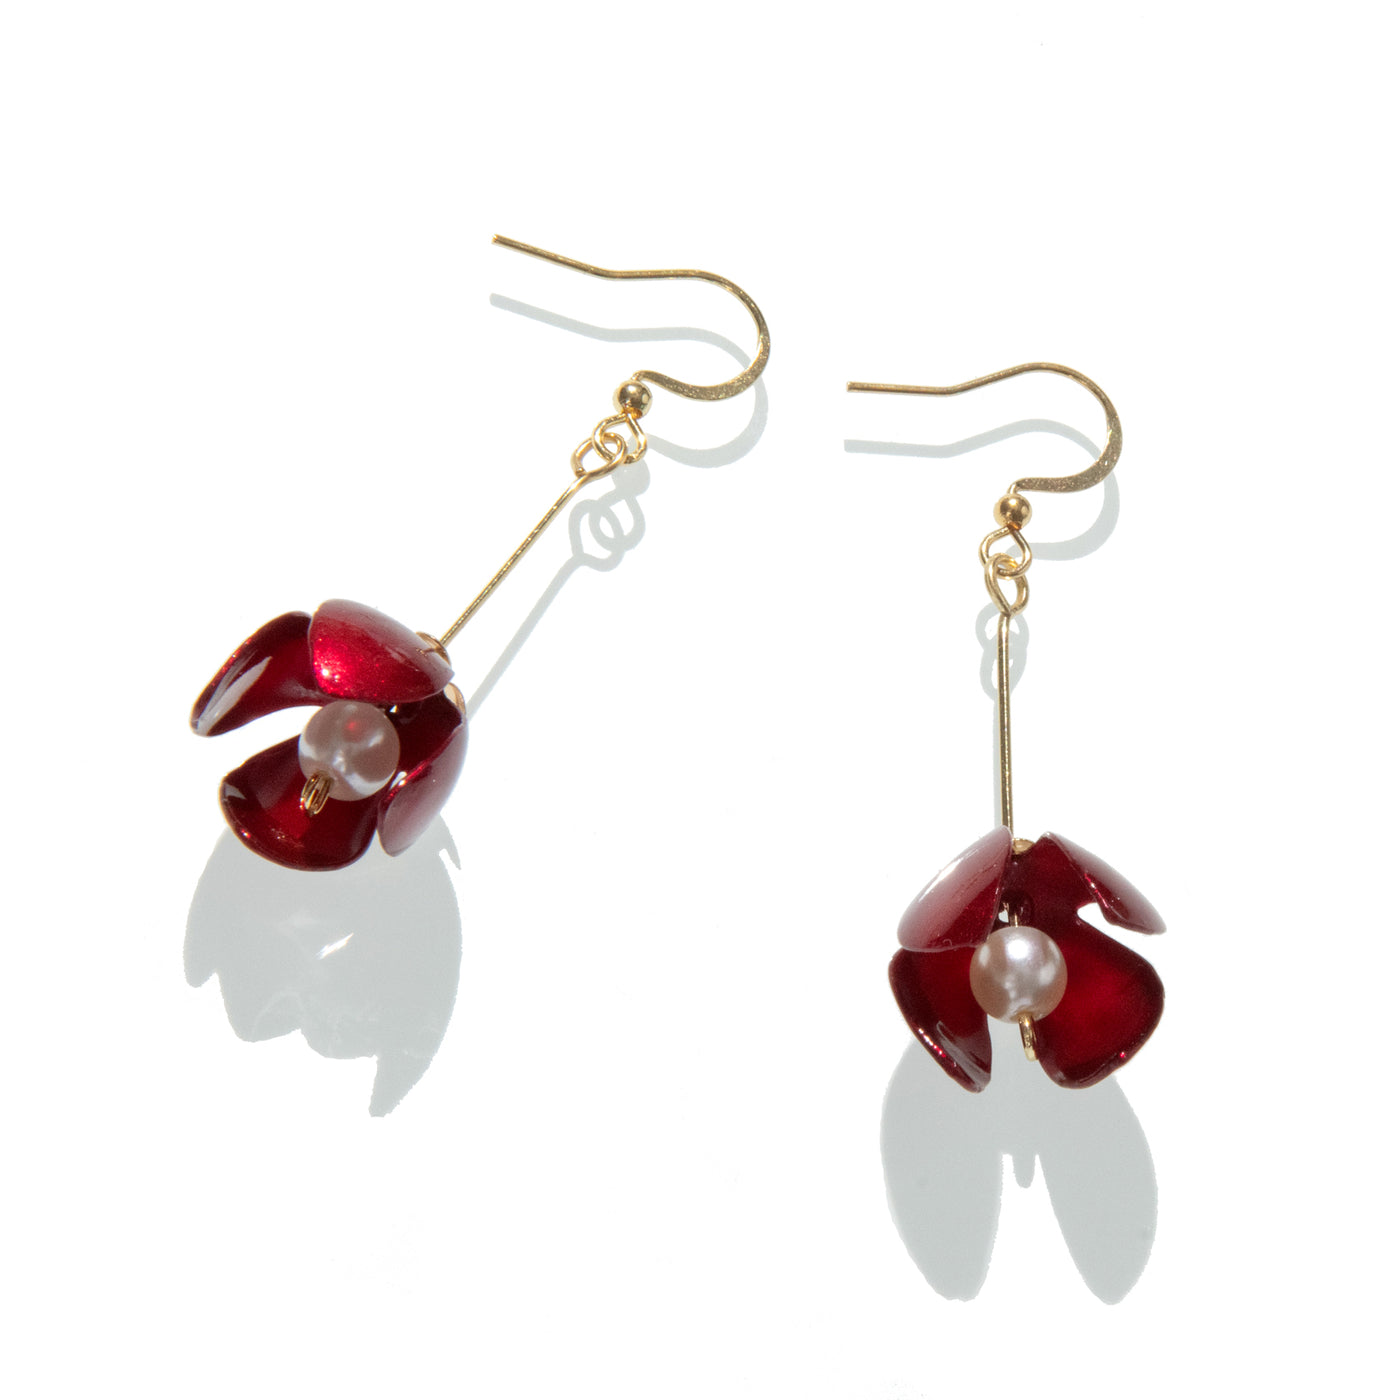 Small Lily Drop Earrings - Red